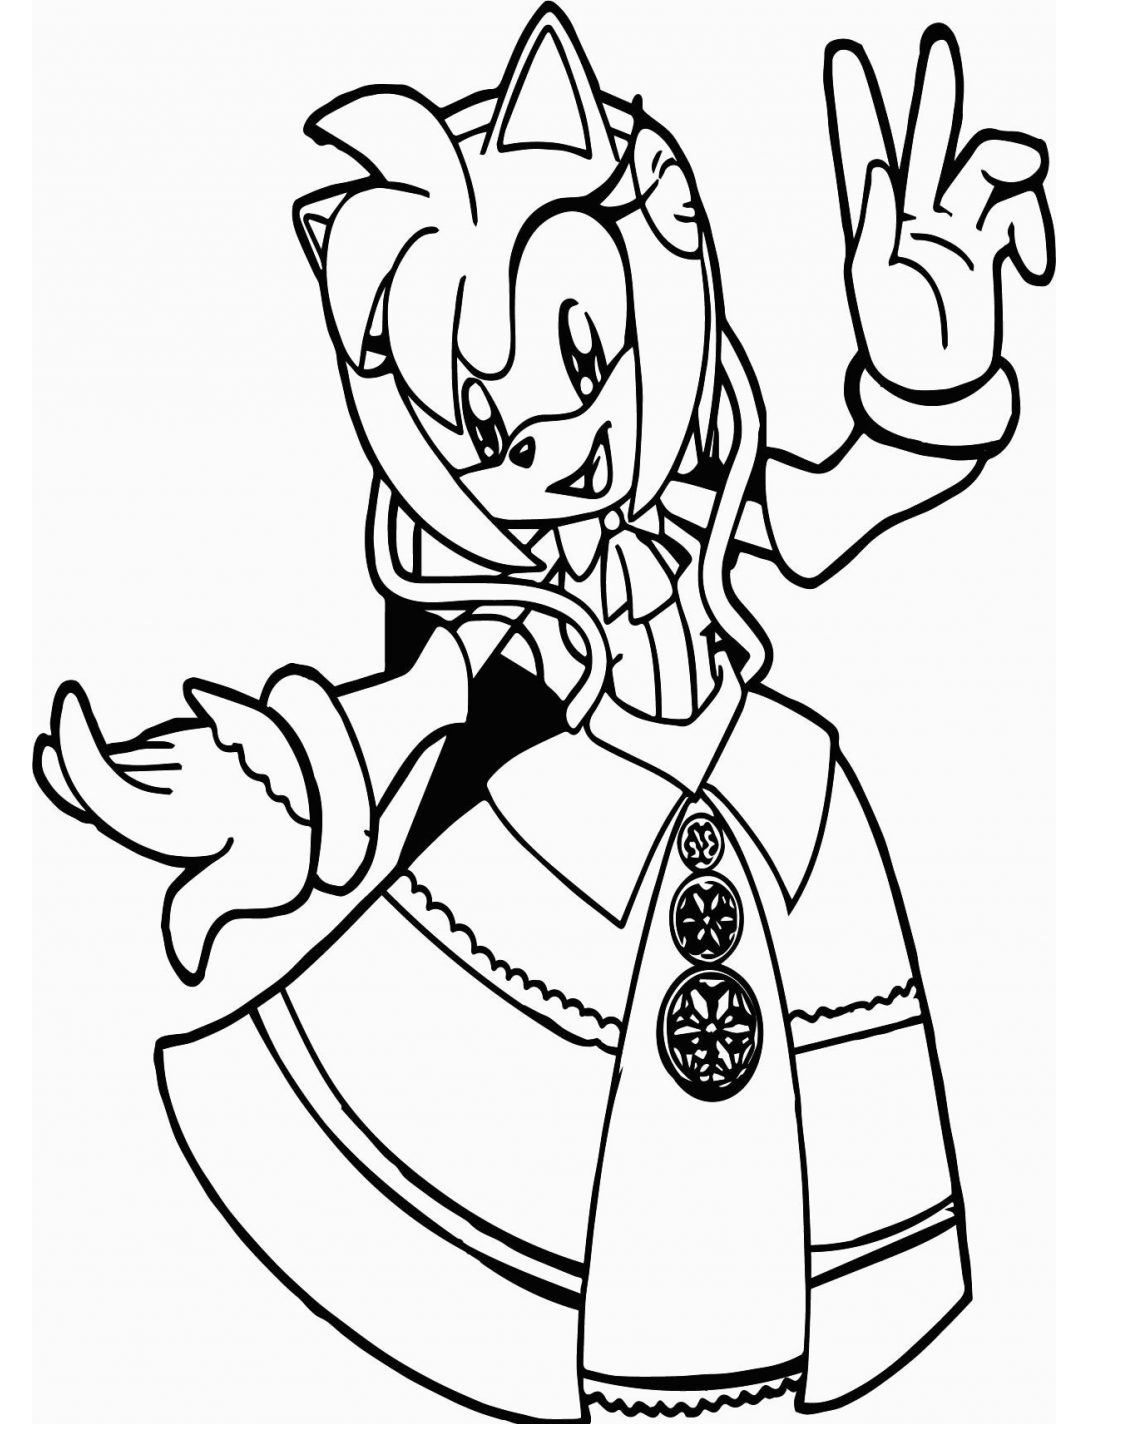 Cool Blaze The Cat Coloring Page - Free Printable Coloring Pages for Kids